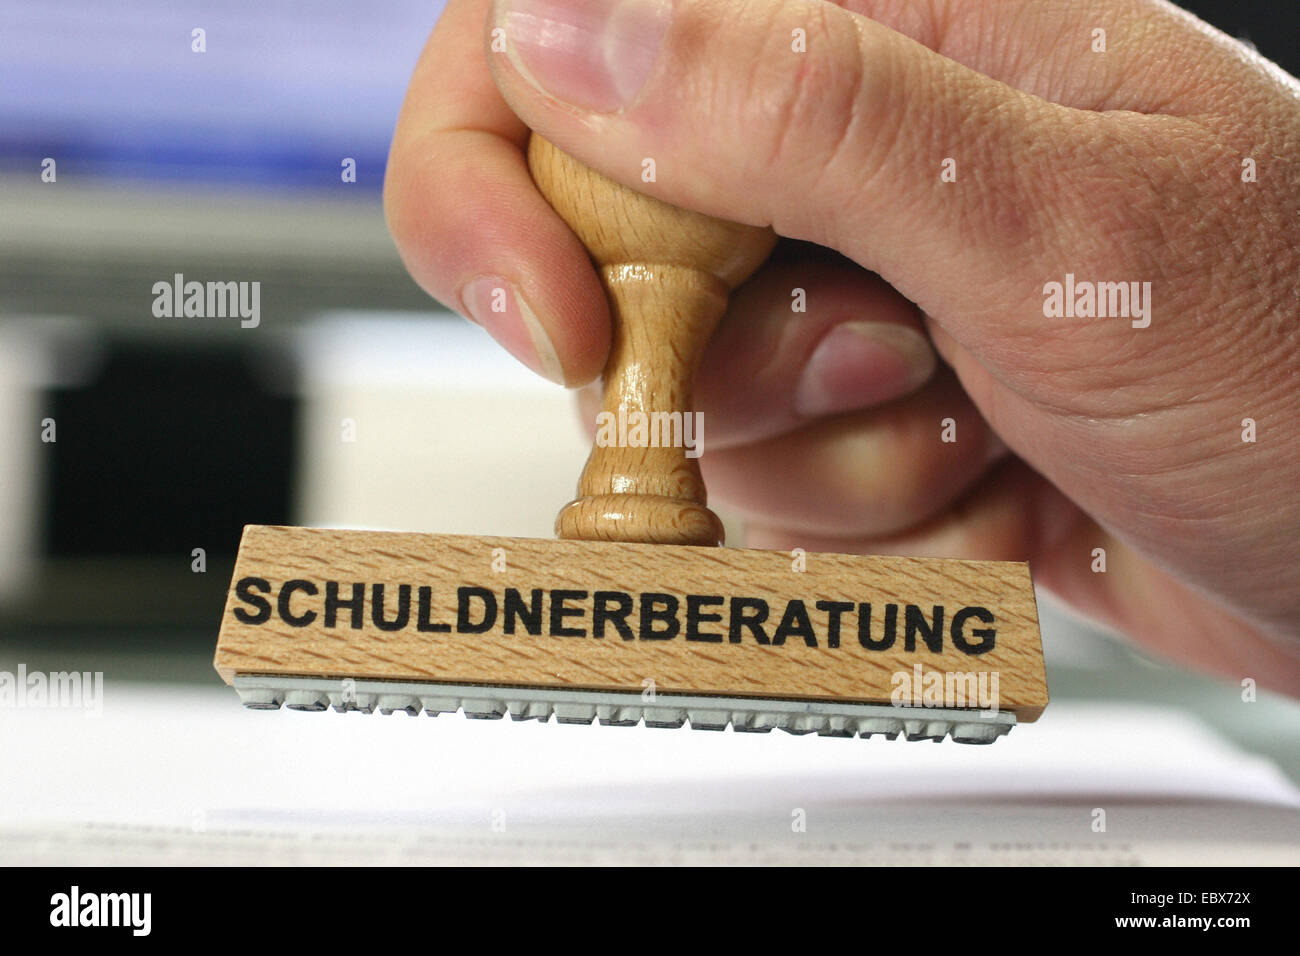 hand with a stamp Schuldnerberatung, credit counseling Stock Photo